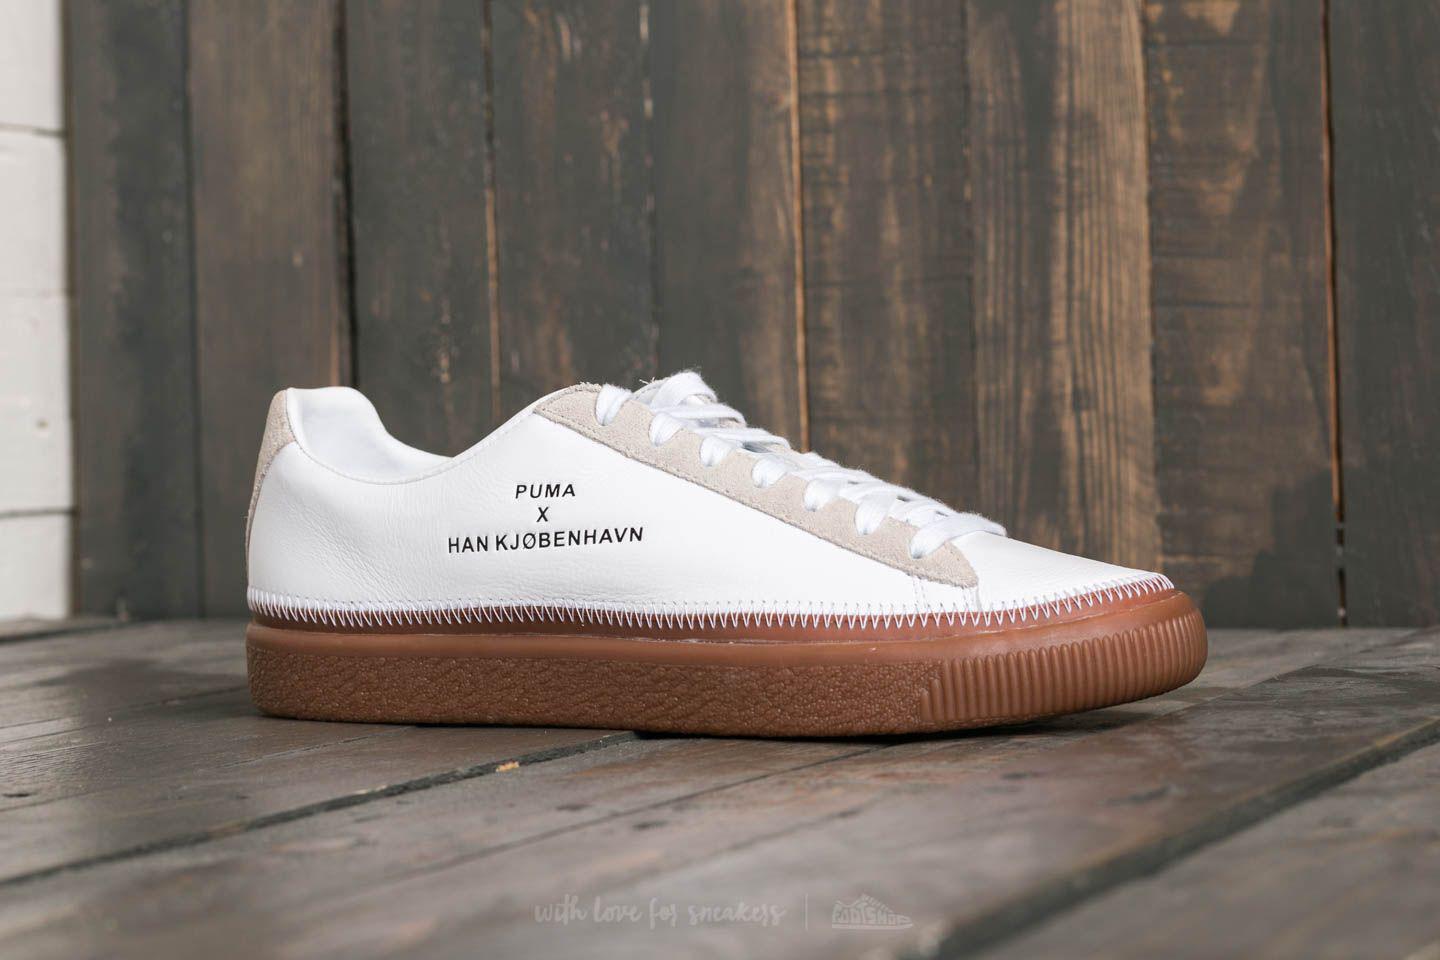 PUMA Leather X Han Kjobenhavn Clyde Stitched in White for Men - Lyst